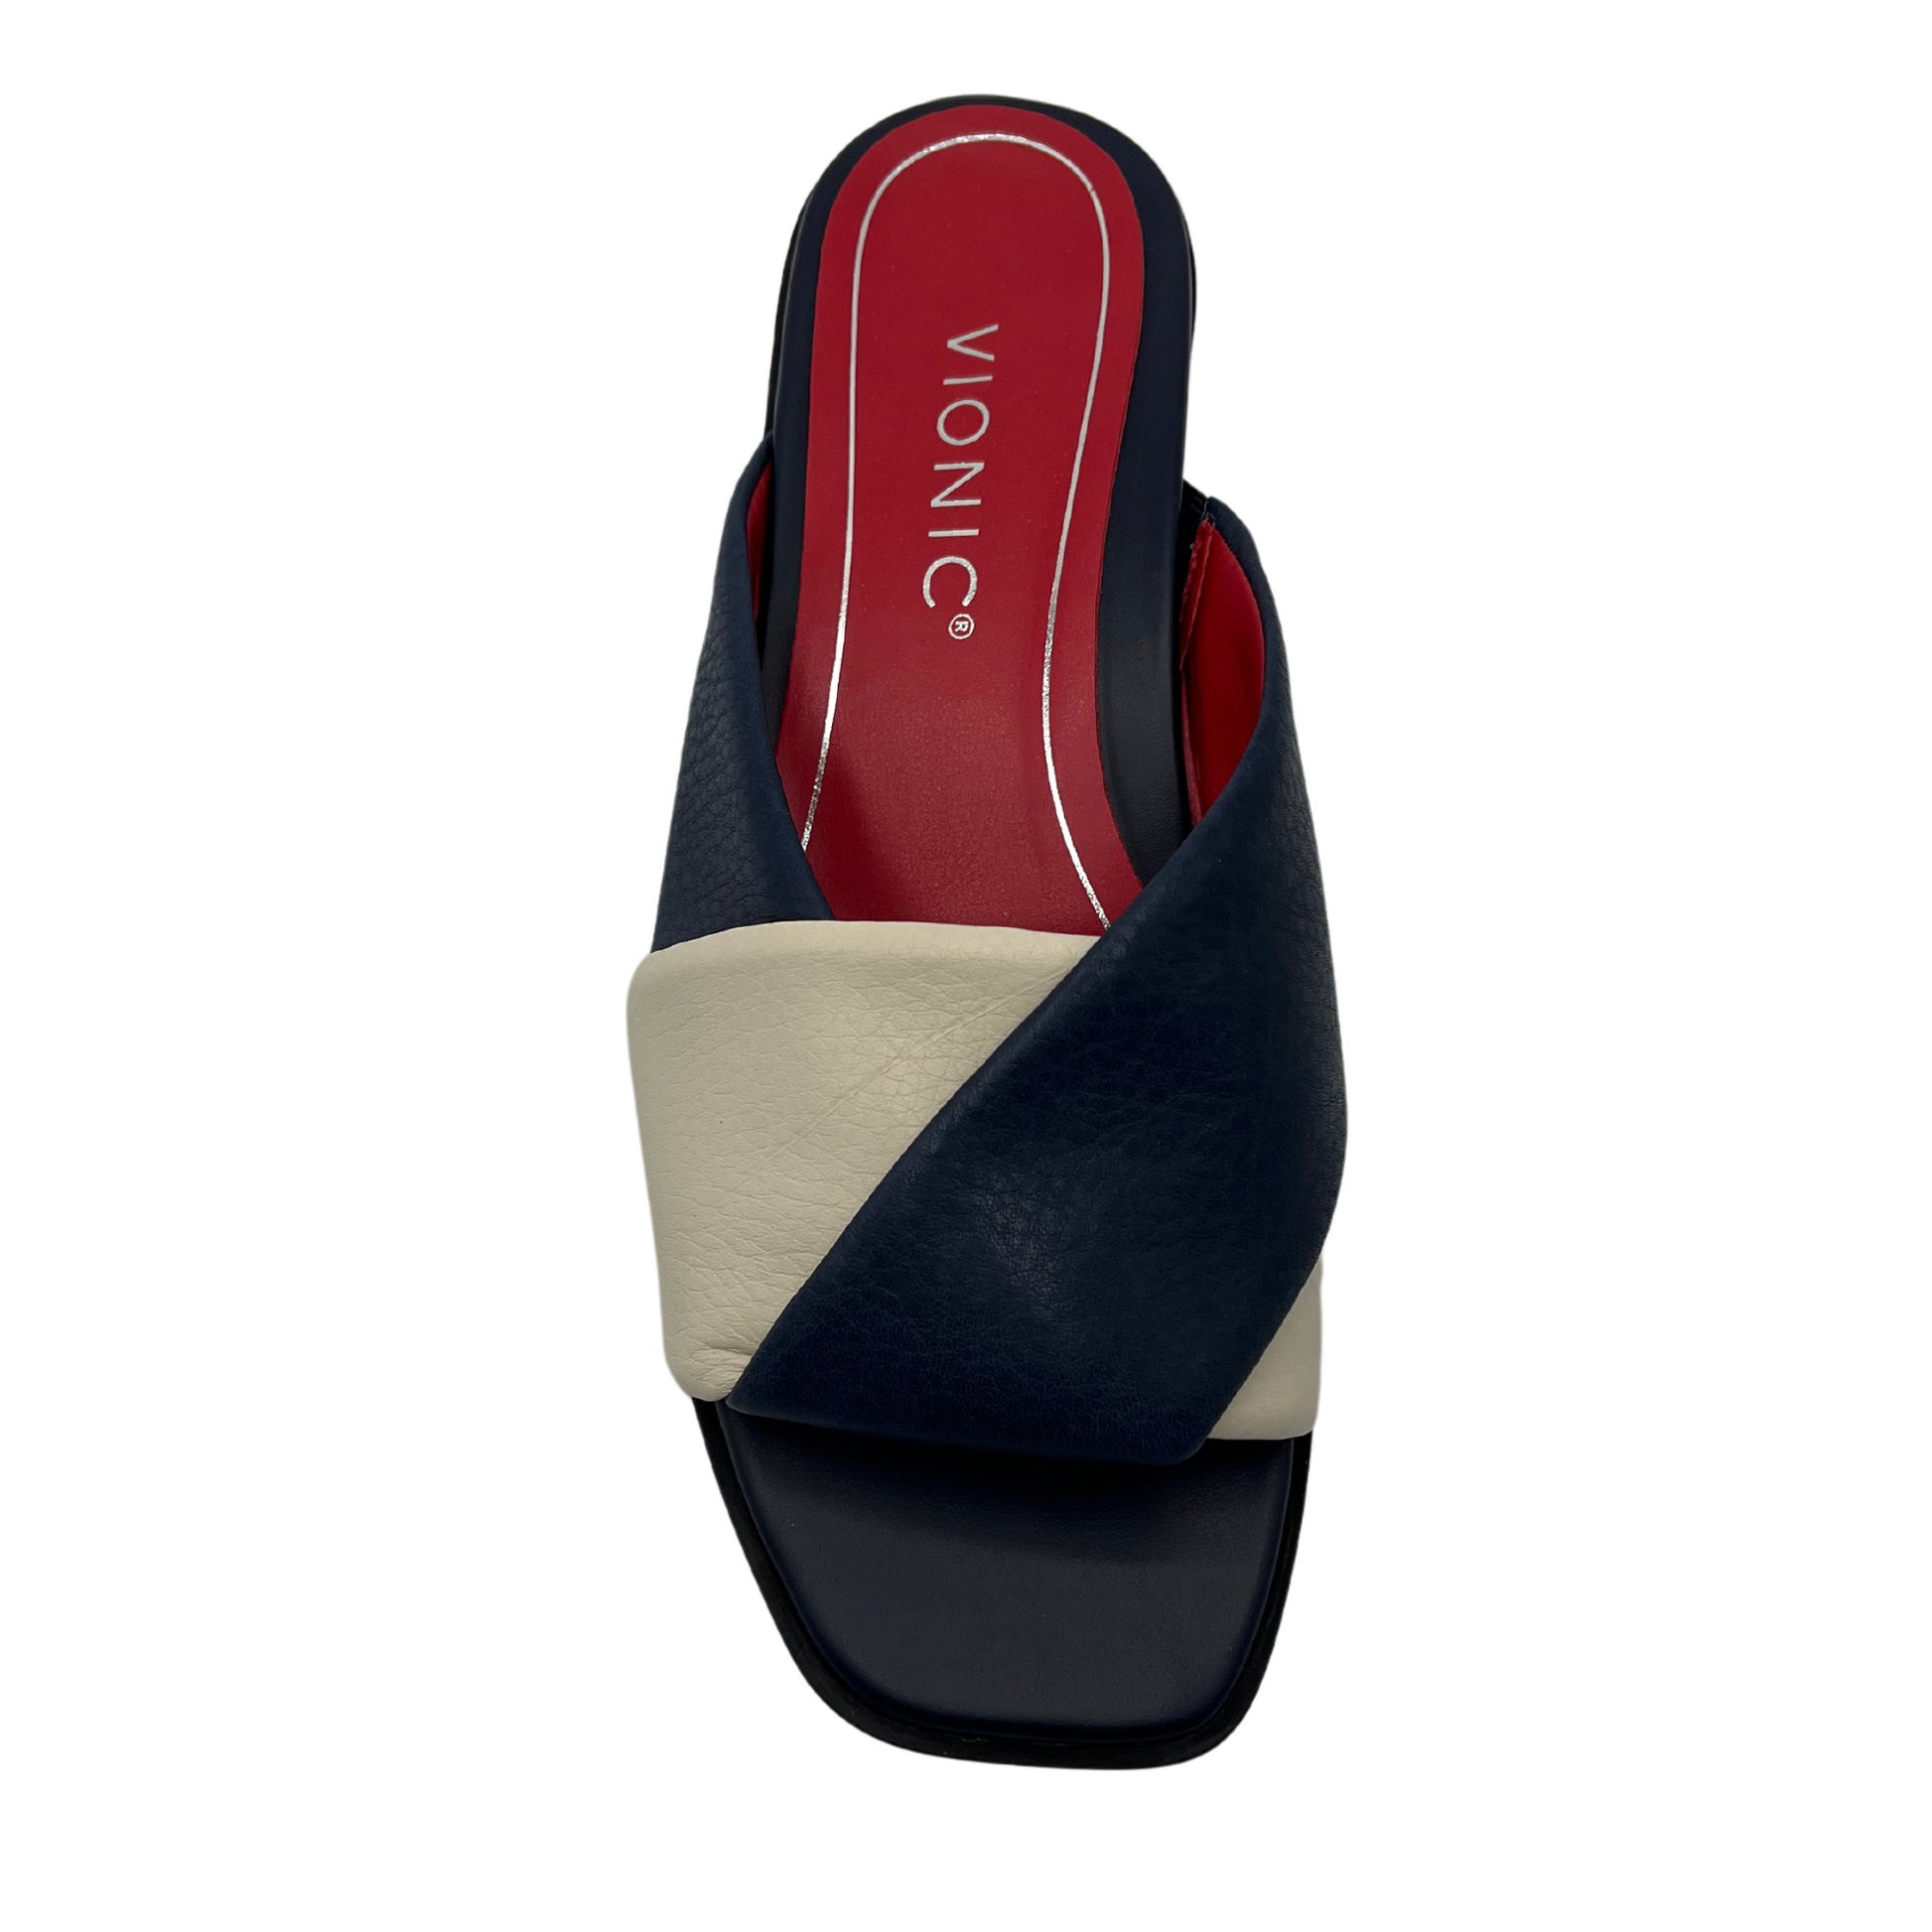 Top view of navy and cream leather slip on sandal with red inner lining and square toe